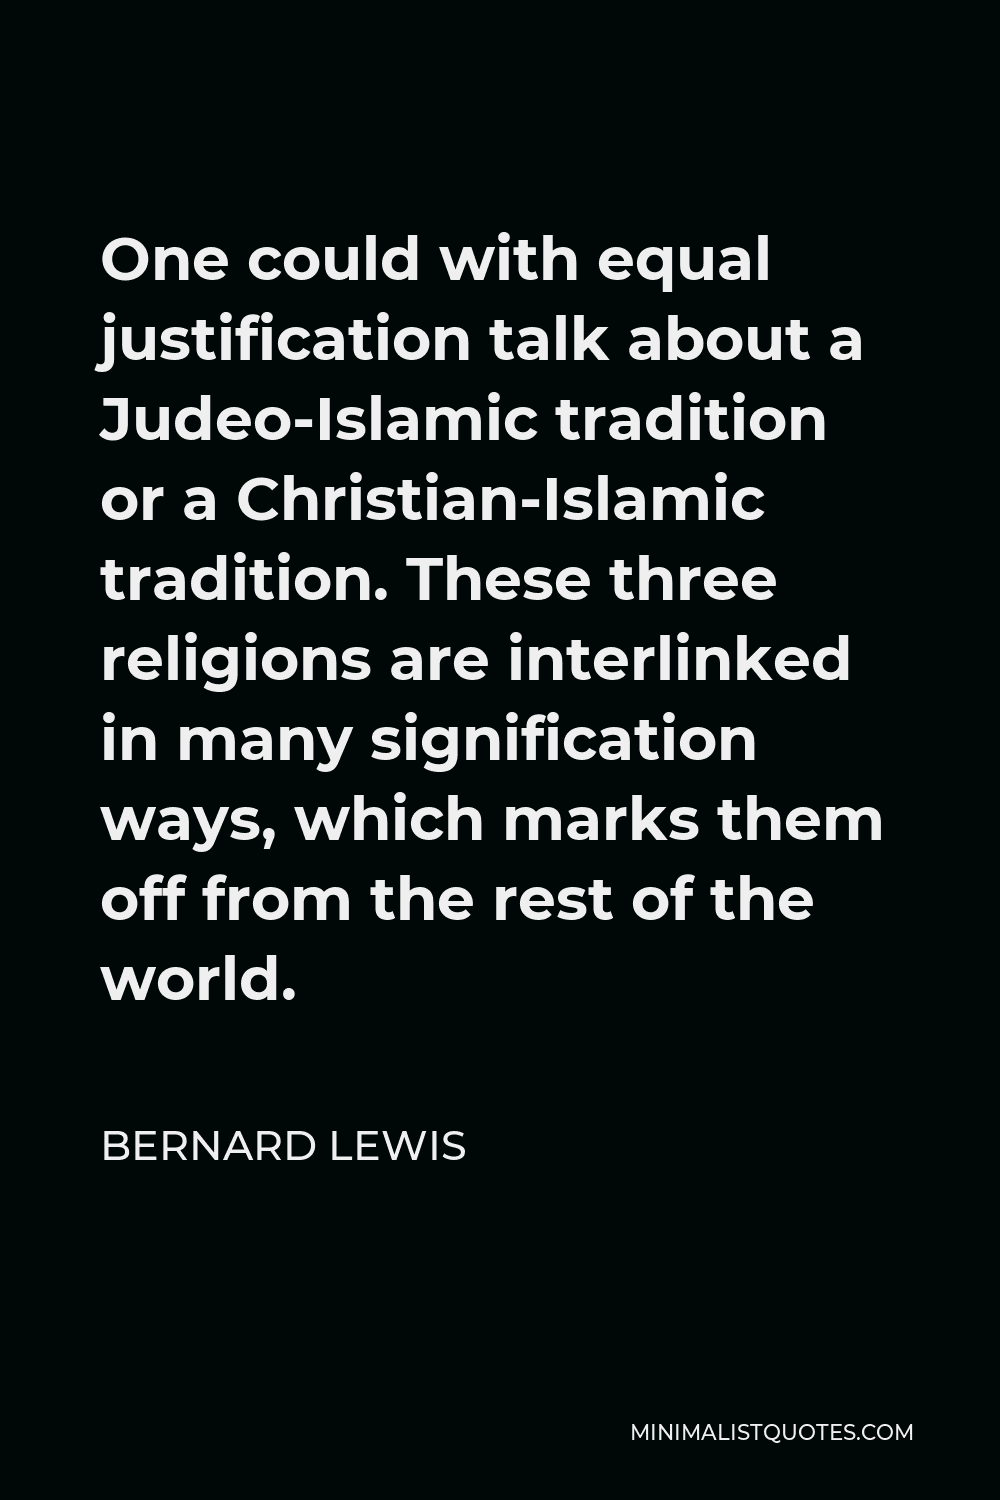 Bernard Lewis Quote - One could with equal justification talk about a Judeo-Islamic tradition or a Christian-Islamic tradition. These three religions are interlinked in many signification ways, which marks them off from the rest of the world.